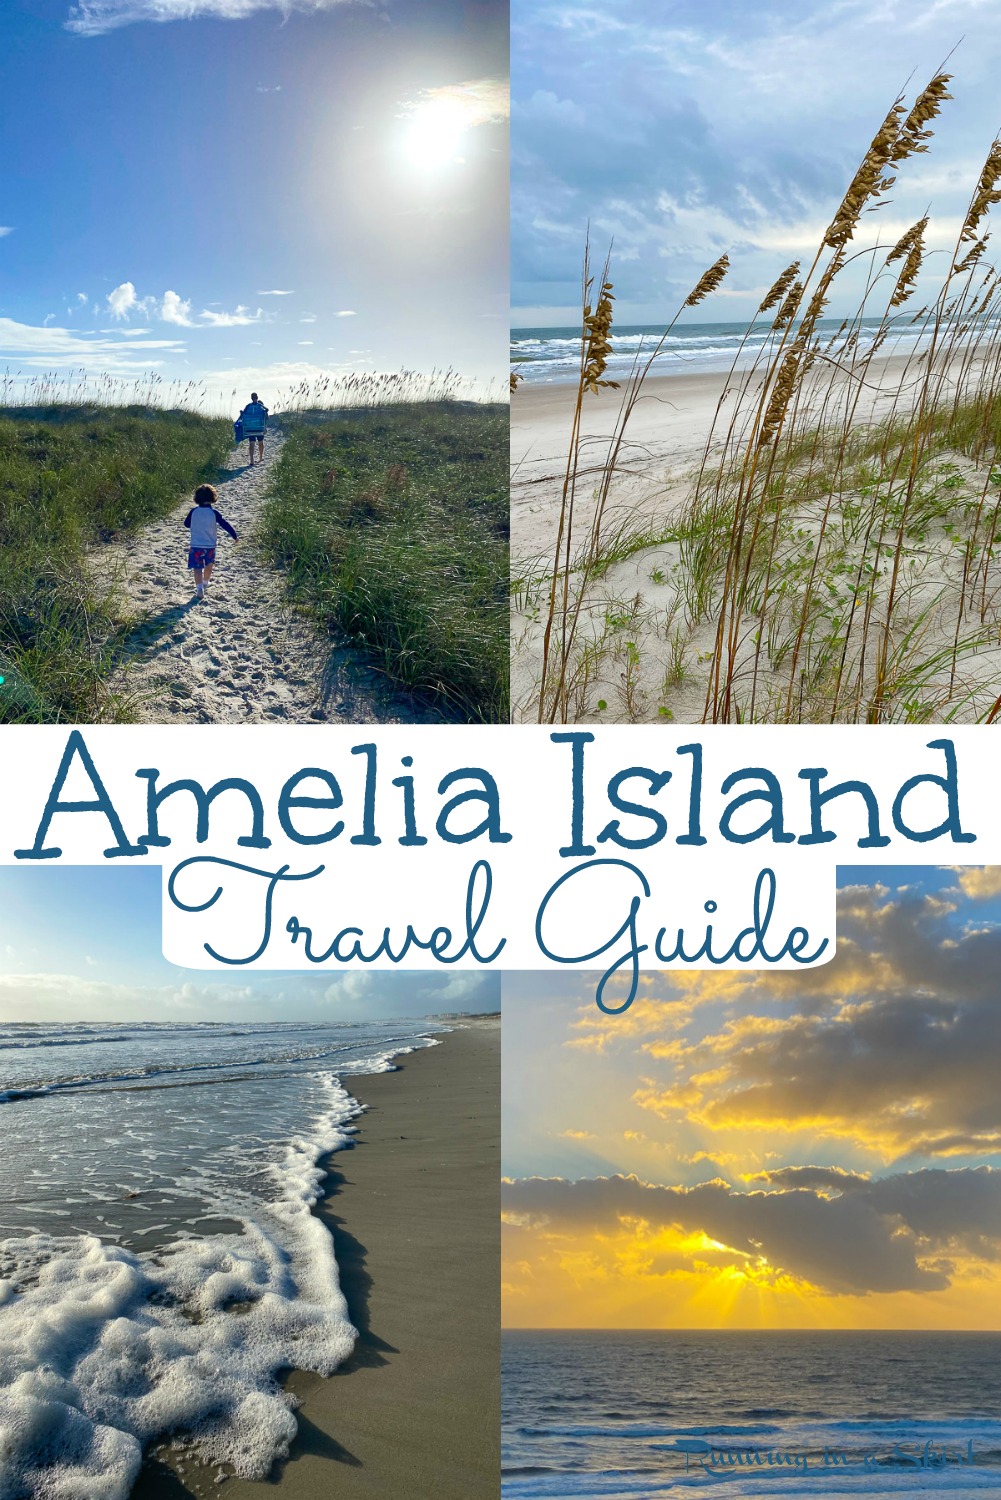 Things to Do in Amelia Island Florida - The Best Amelia Island Travel Guide with must see beach locations, restaurants, shops, places to find shells/ shark teeth, sunrise/sunset and state parks. Great with kids and adults. Find your vacations buckets lists here. / Running in a Skirt #florida #travelguide #floridatravel #travelblog #ameliaisland via @juliewunder